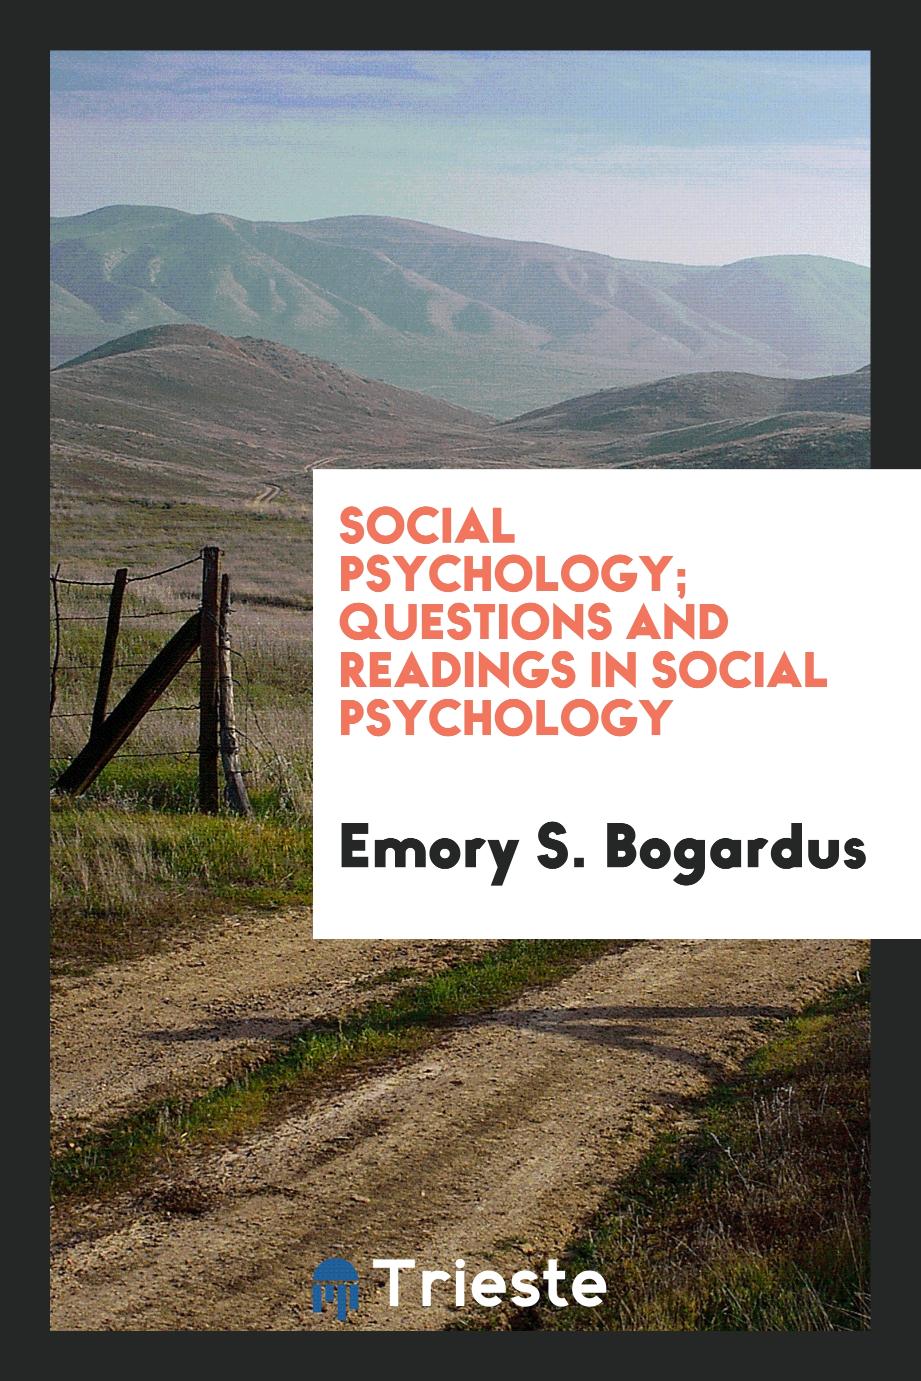 Social psychology; questions and readings in social psychology